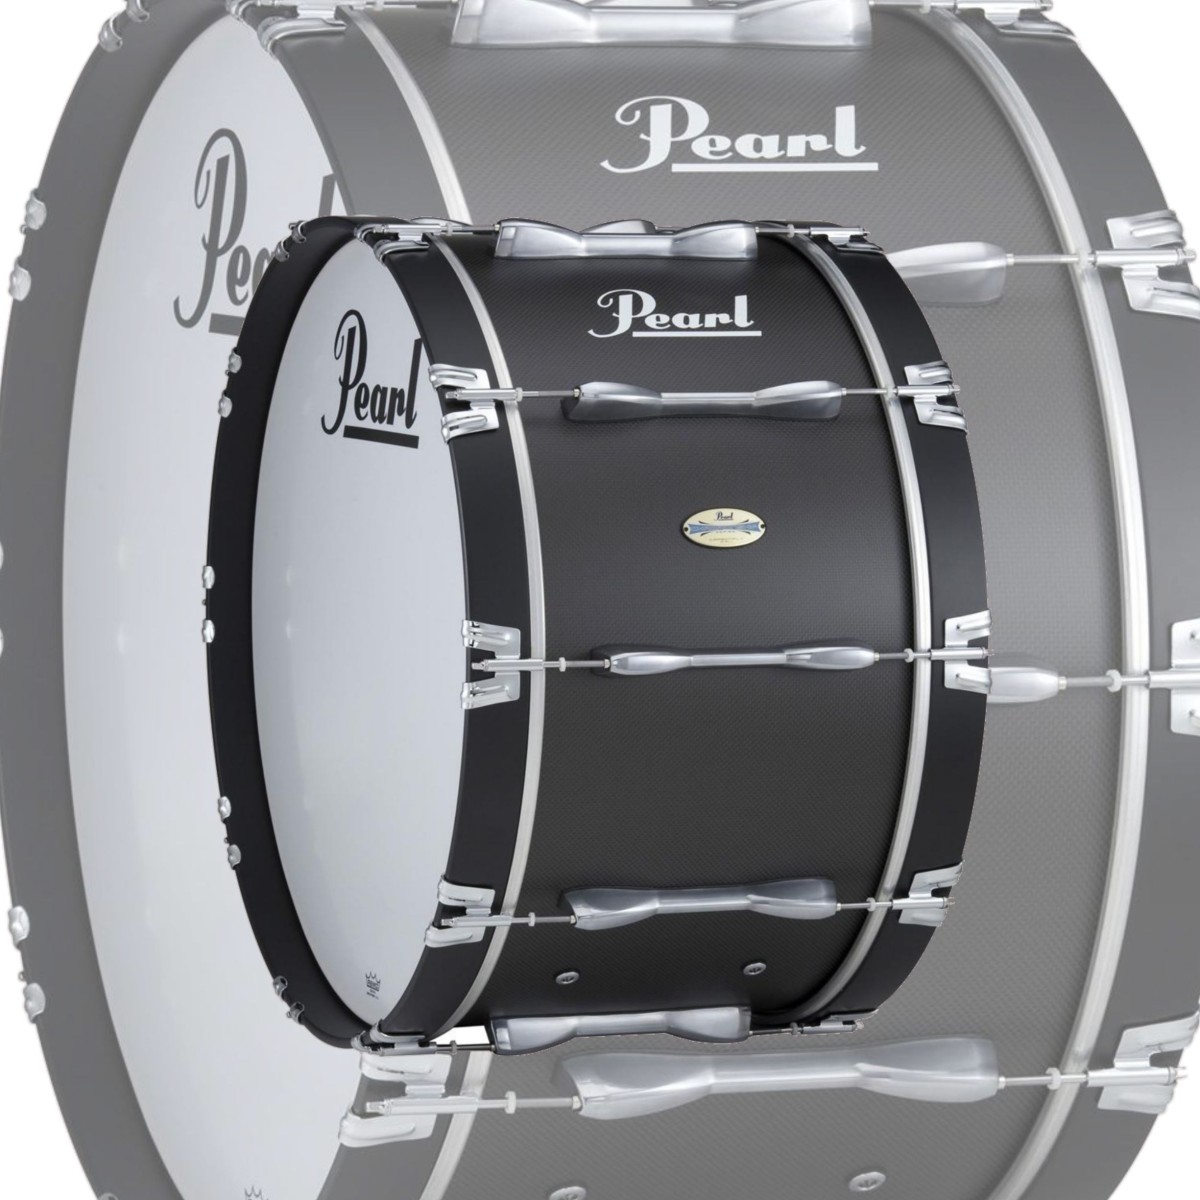 Pearl CarbonPly Championship 24"x14"  Marching Bass Drum